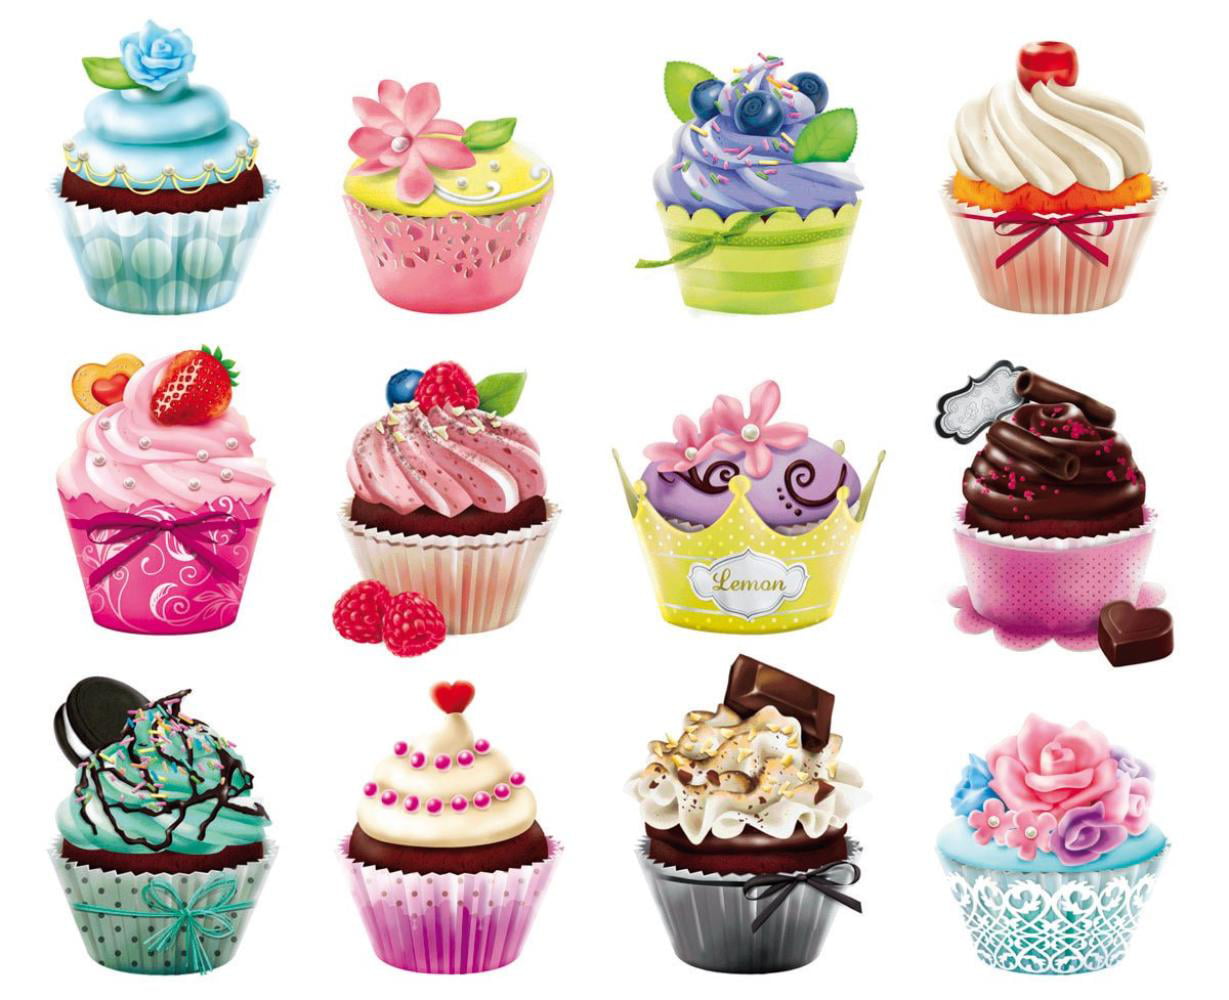 A 500 Piece Jigsaw Puzzle by Lafayette Puzzle Factory Cupcakes II 